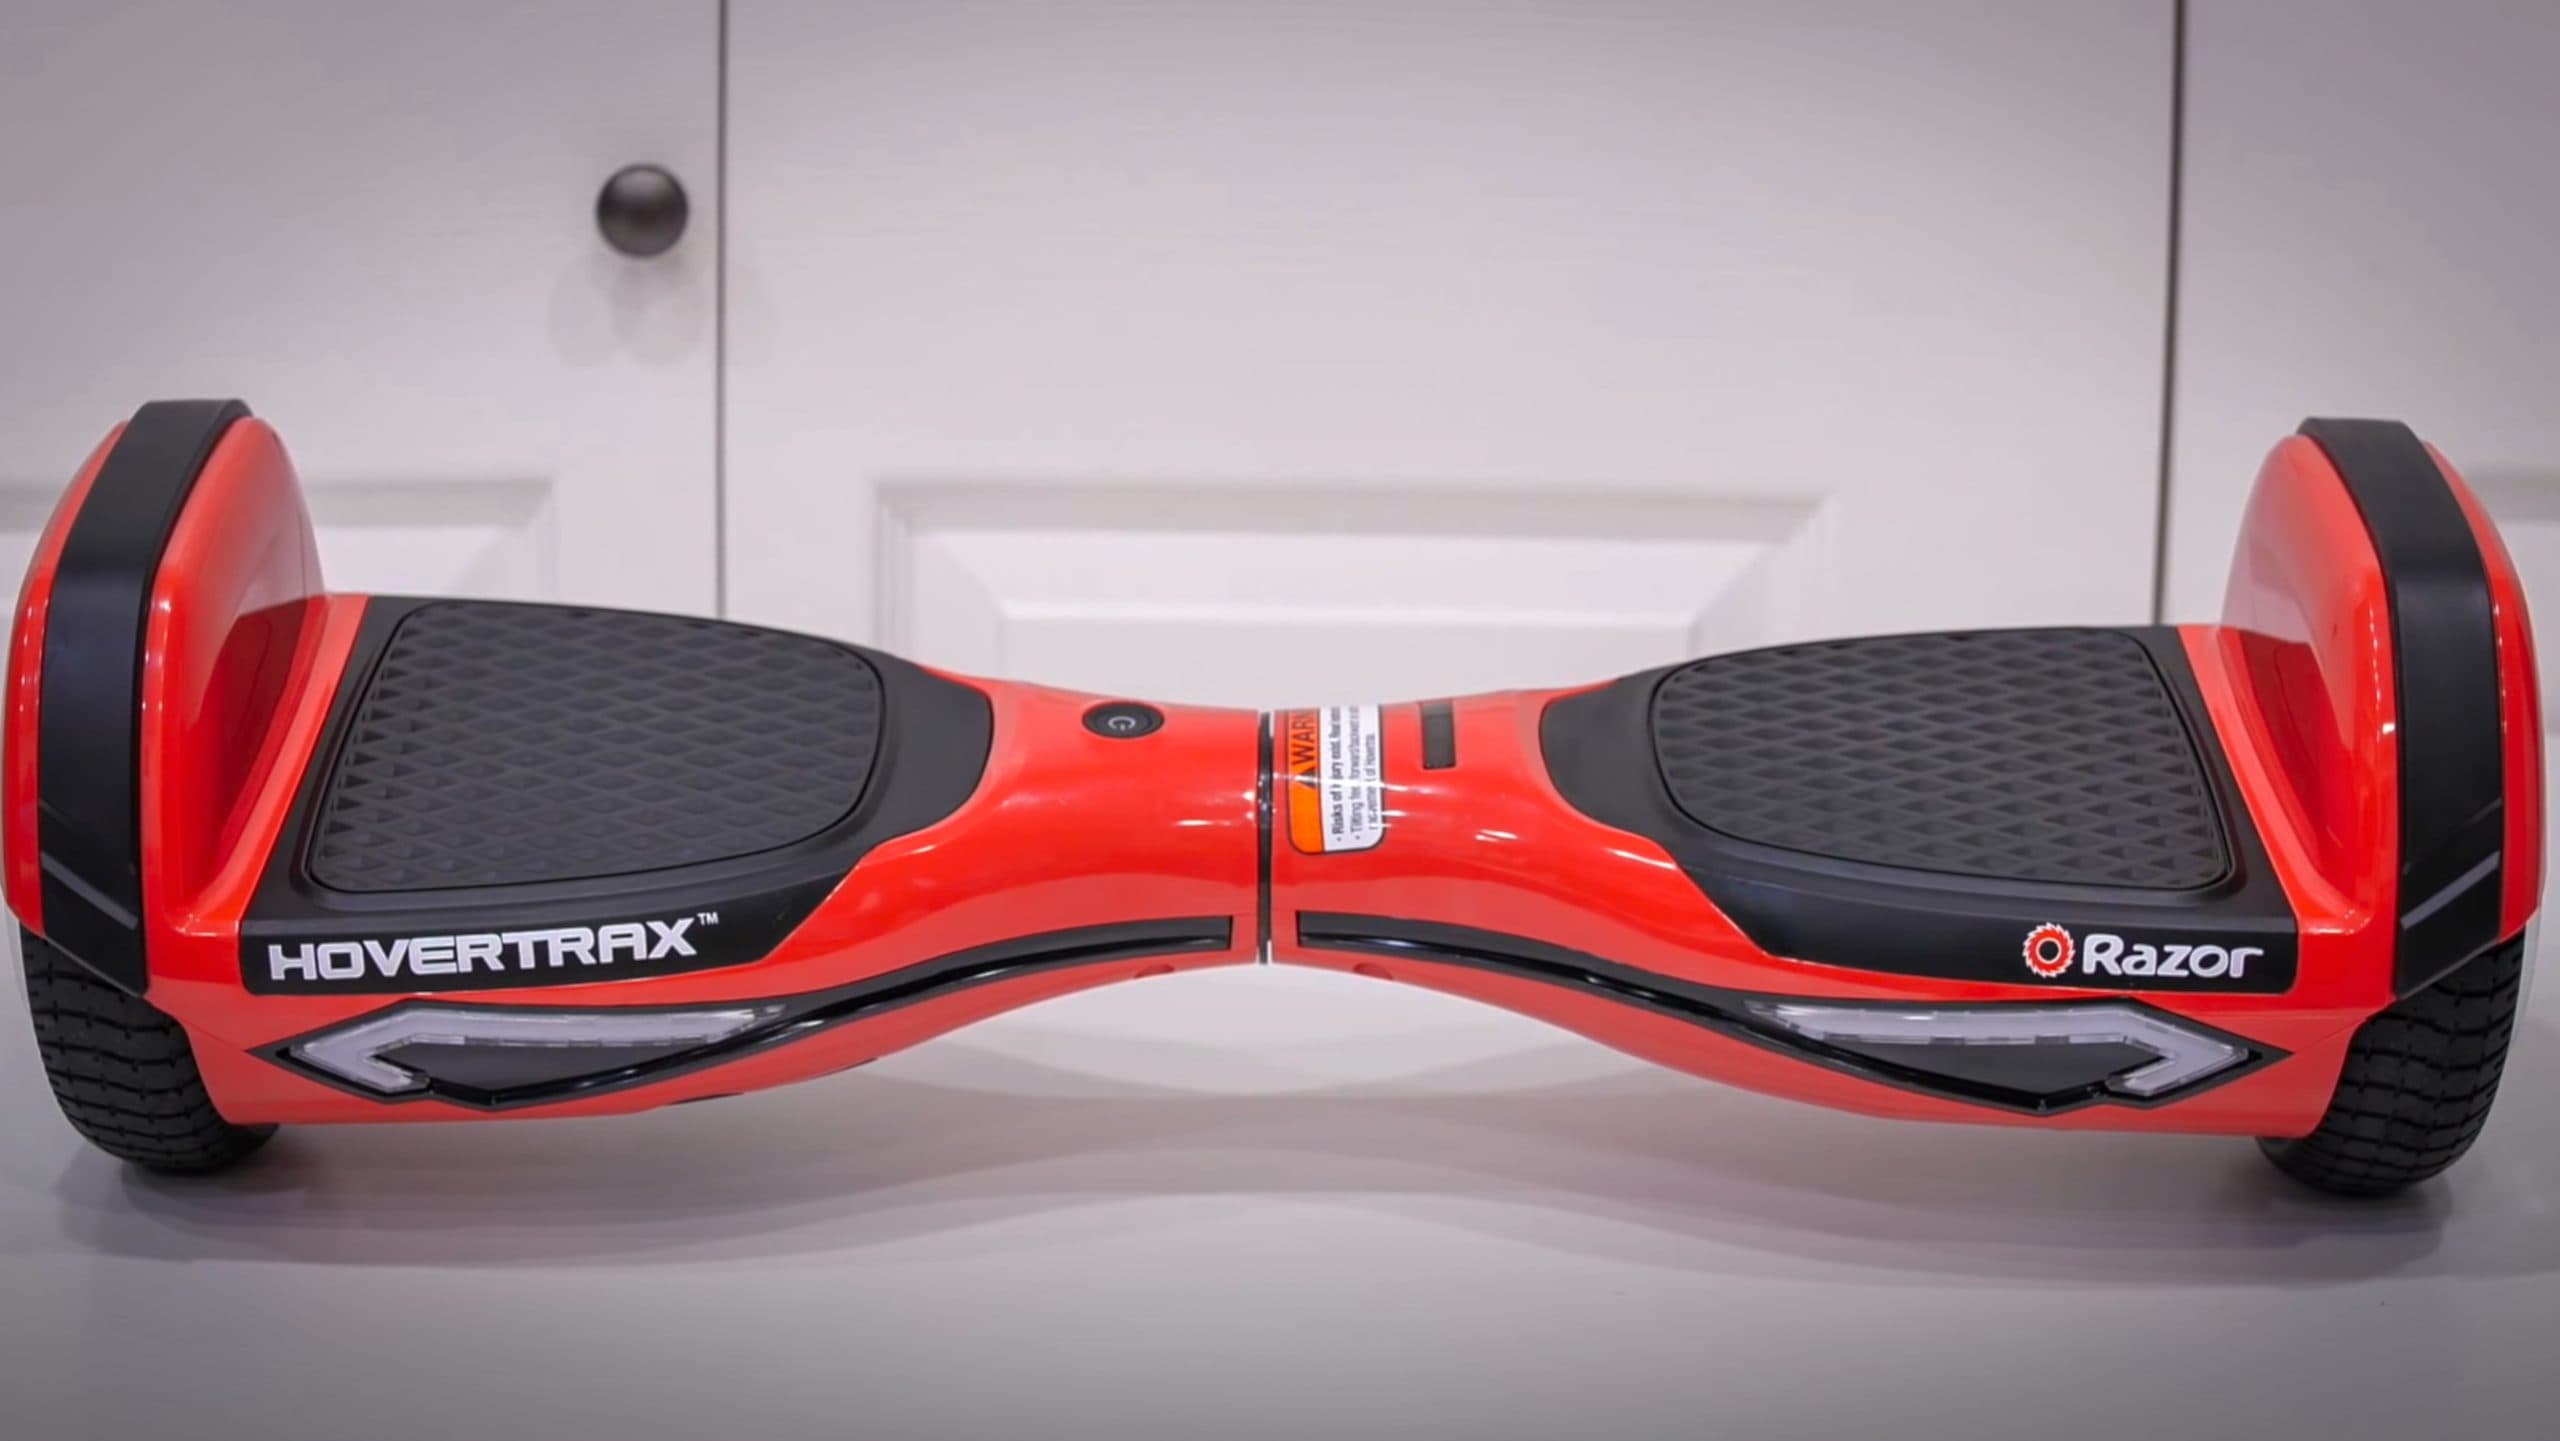 10 Razor Hovertrax Lux Hoverboard Reviews 2023 - Buyer's Guide